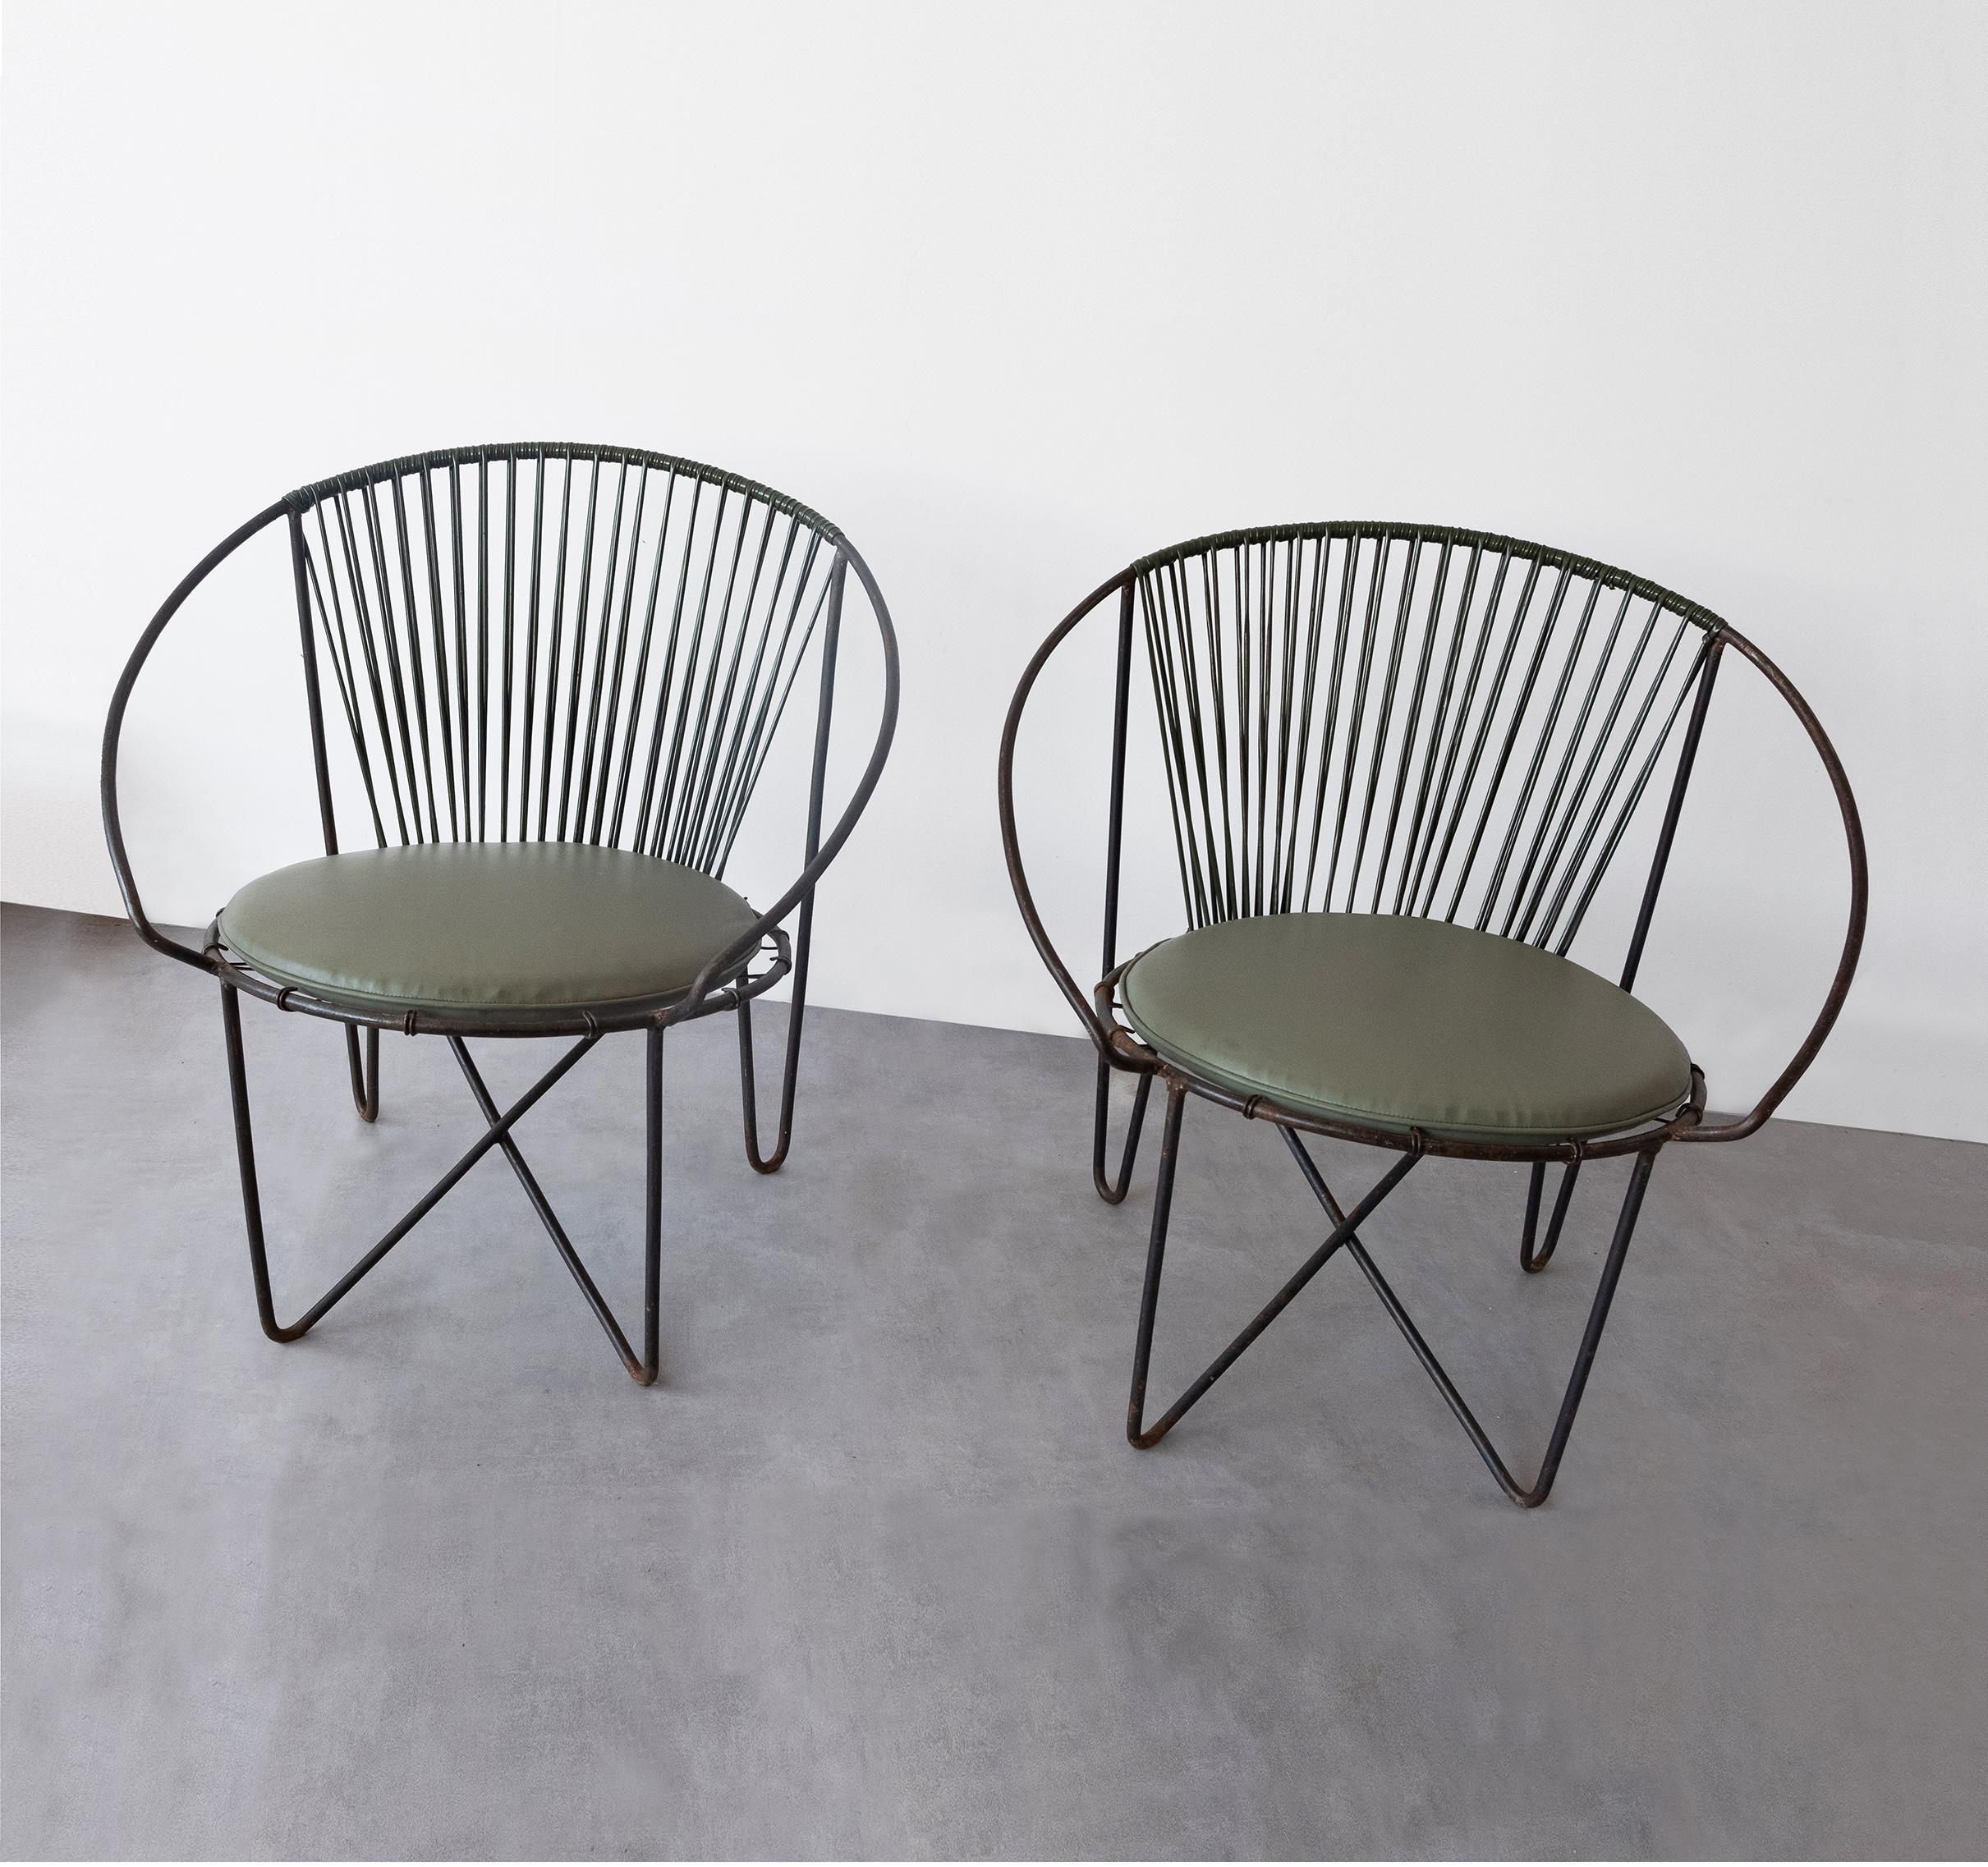 Mid-Century Modern Pair of Wrought Iron chairs by José Zanine Caldas, Brazil, 1950s For Sale